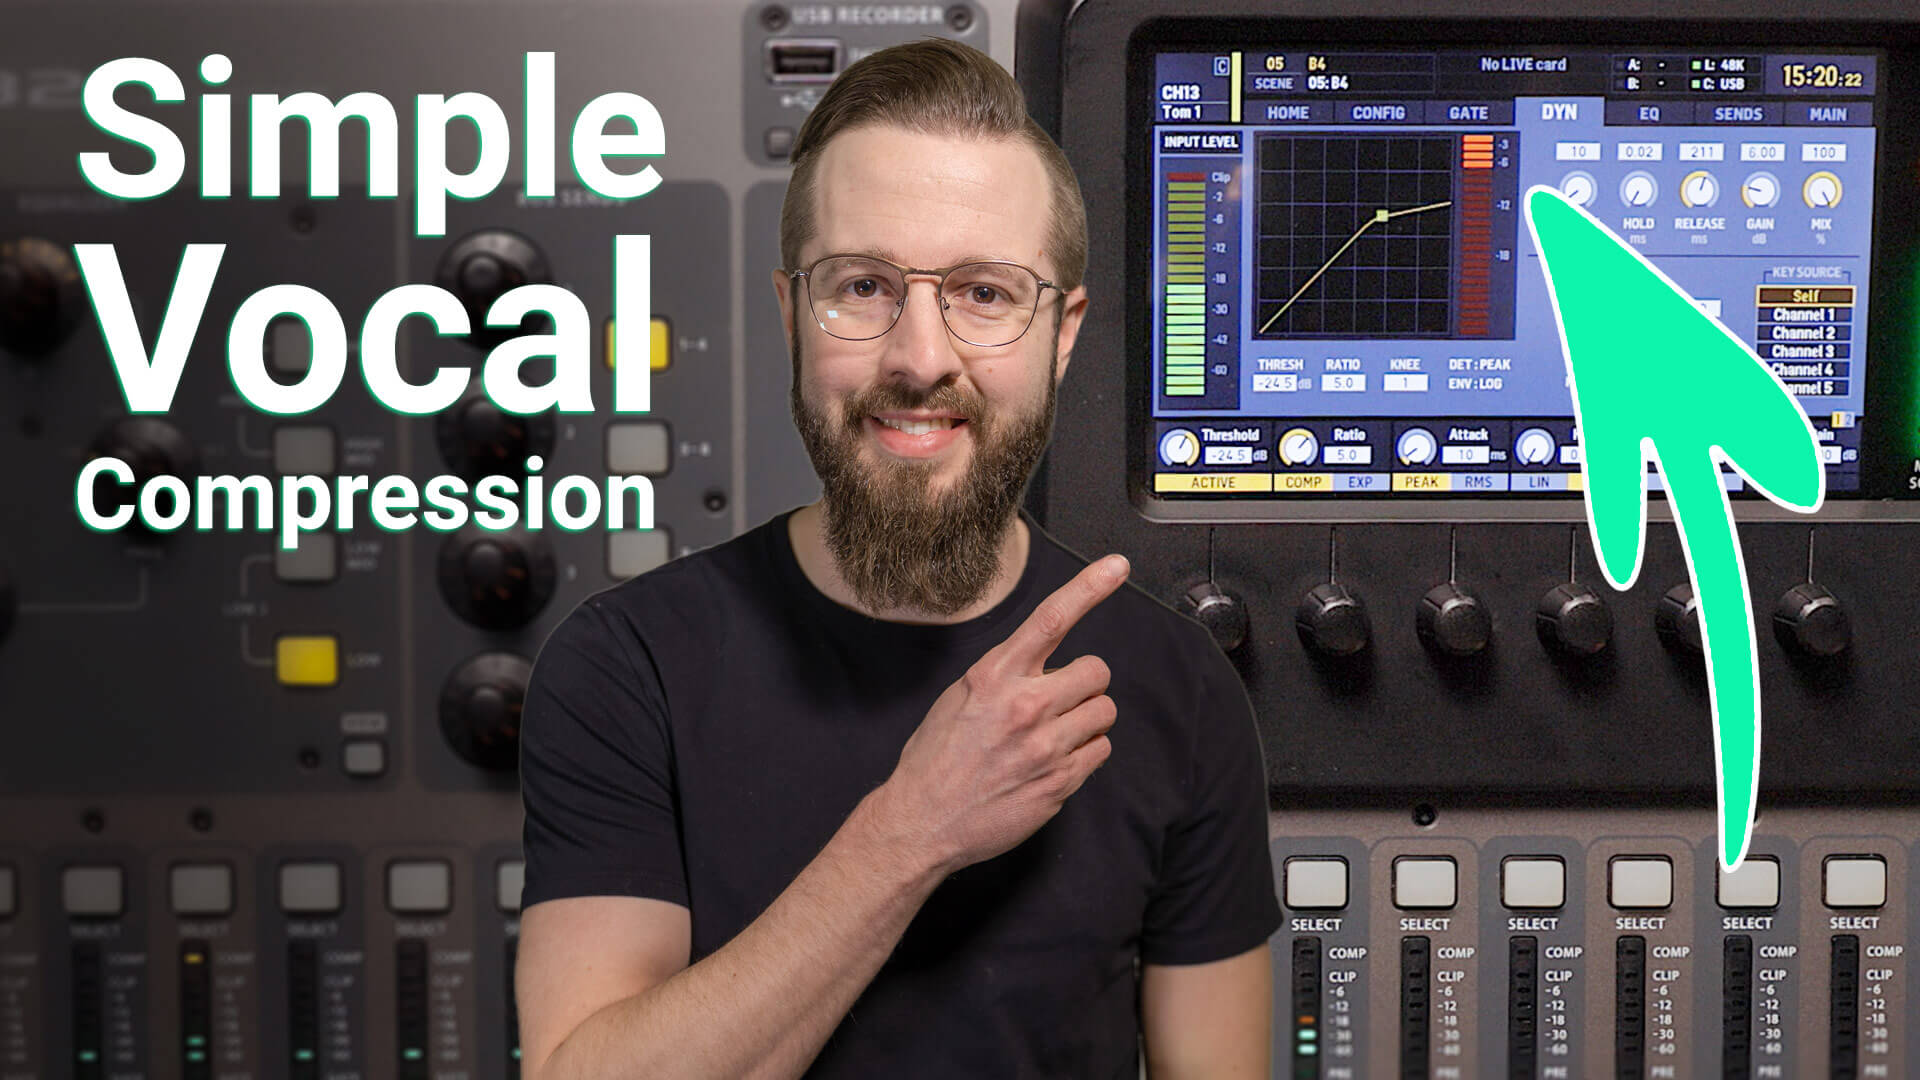 The Best Compressor Settings for Vocals (Exact Settings to Use) - Music Guy  Mixing